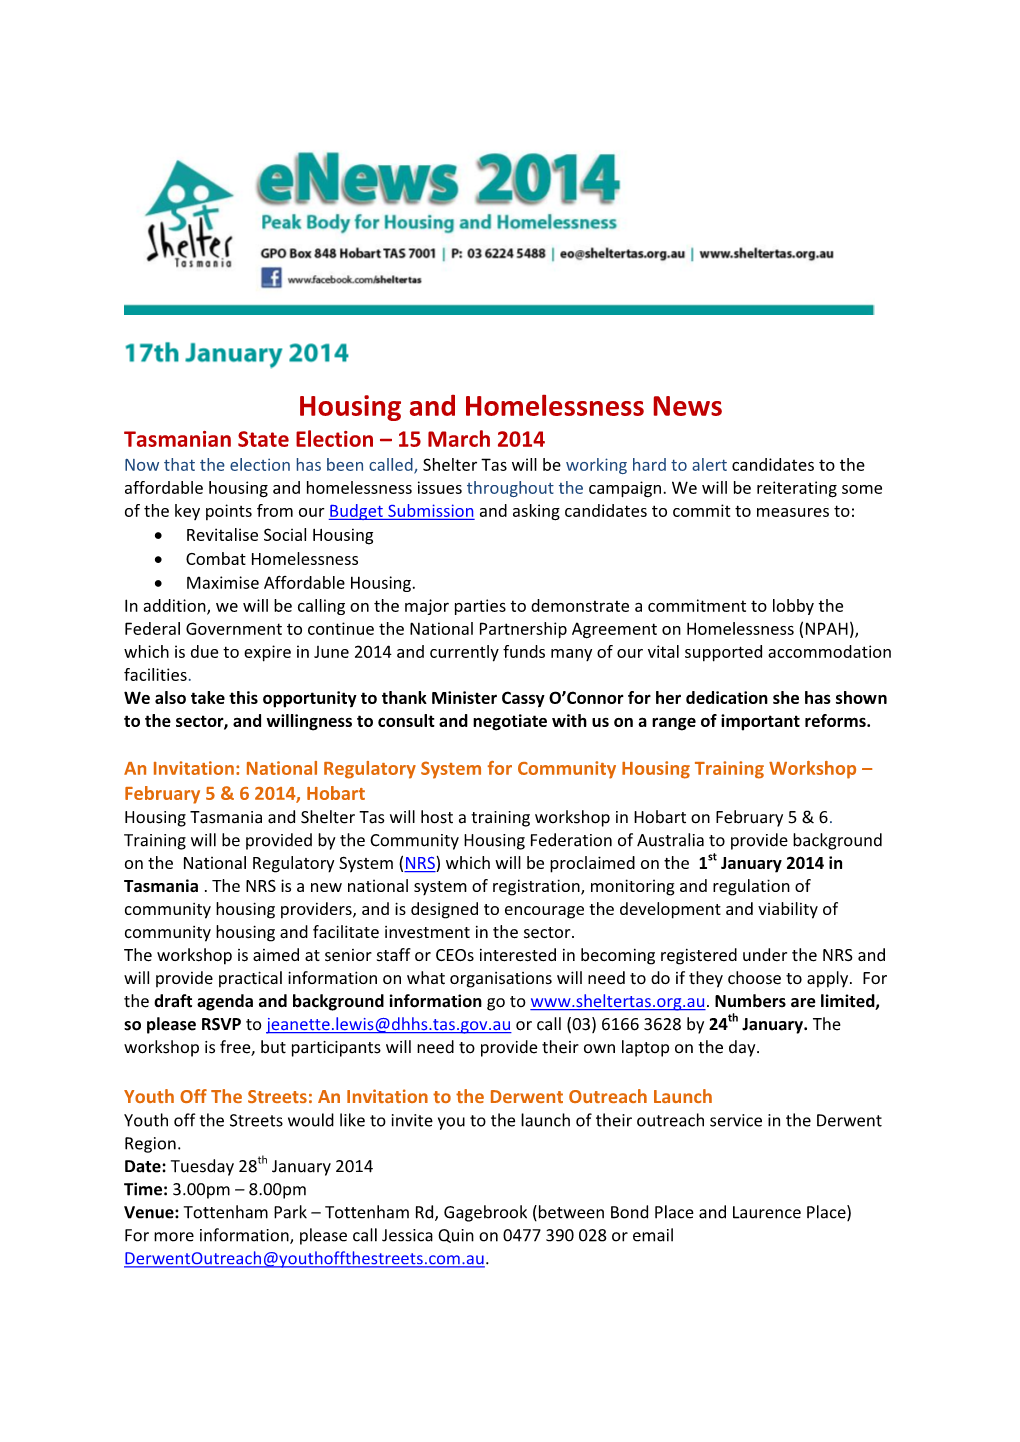 Housing and Homelessness News